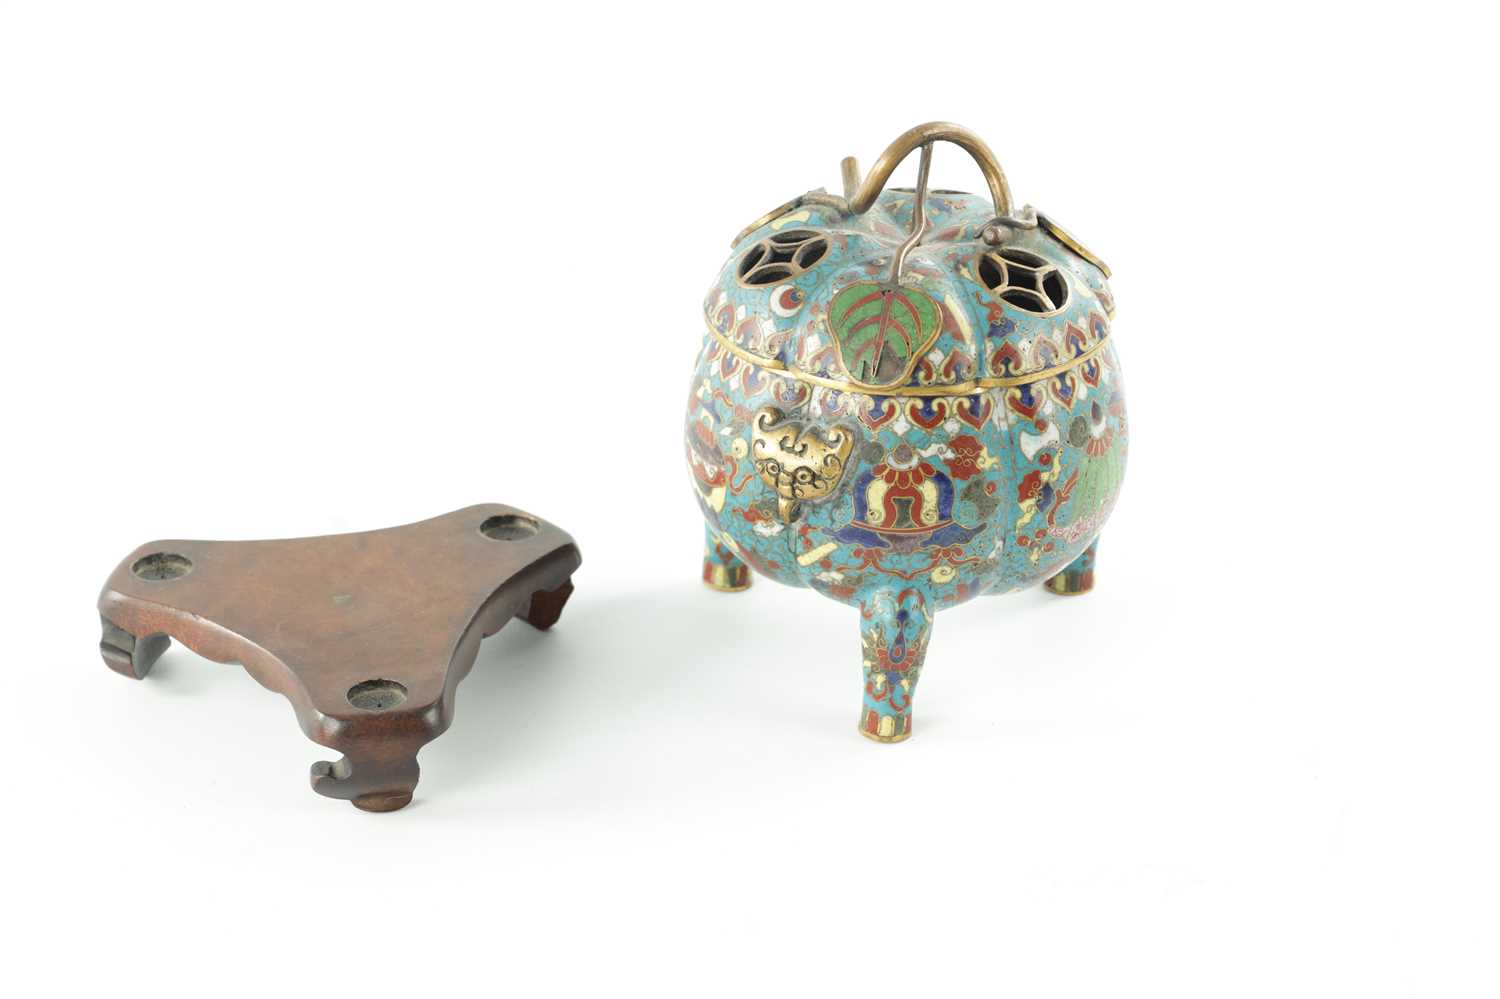 A GOOD EARLY 19TH CENTURY CHINESE CLOISONNÉ INCENSE BURNER - Image 7 of 8